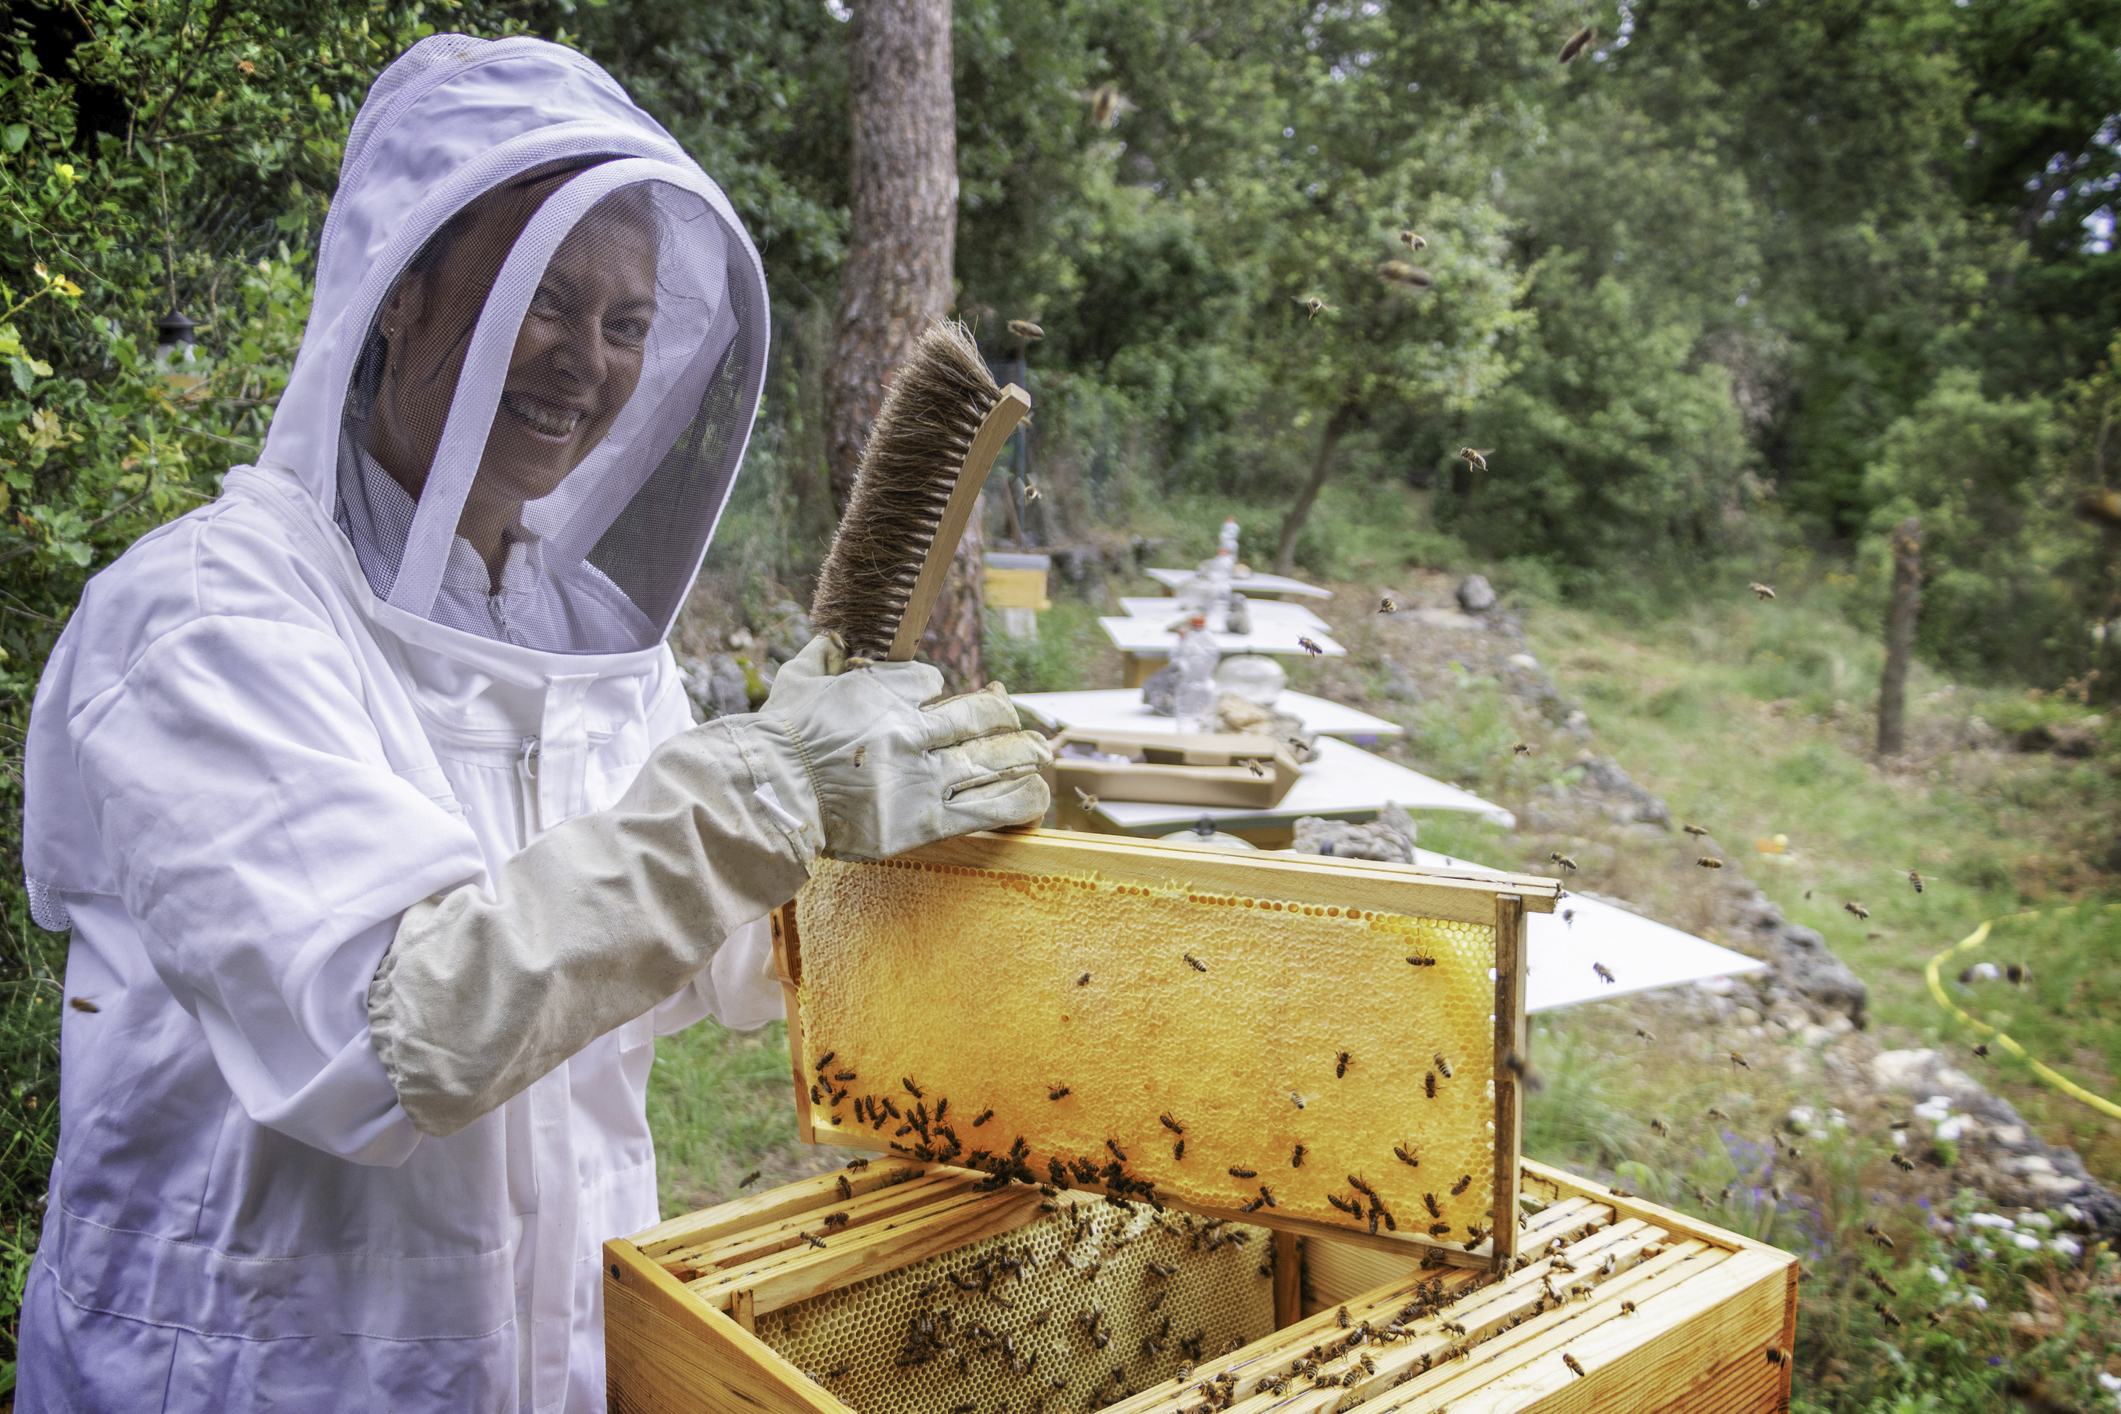  Australian skills assessment criteria change for Apiarists and Beekeepers